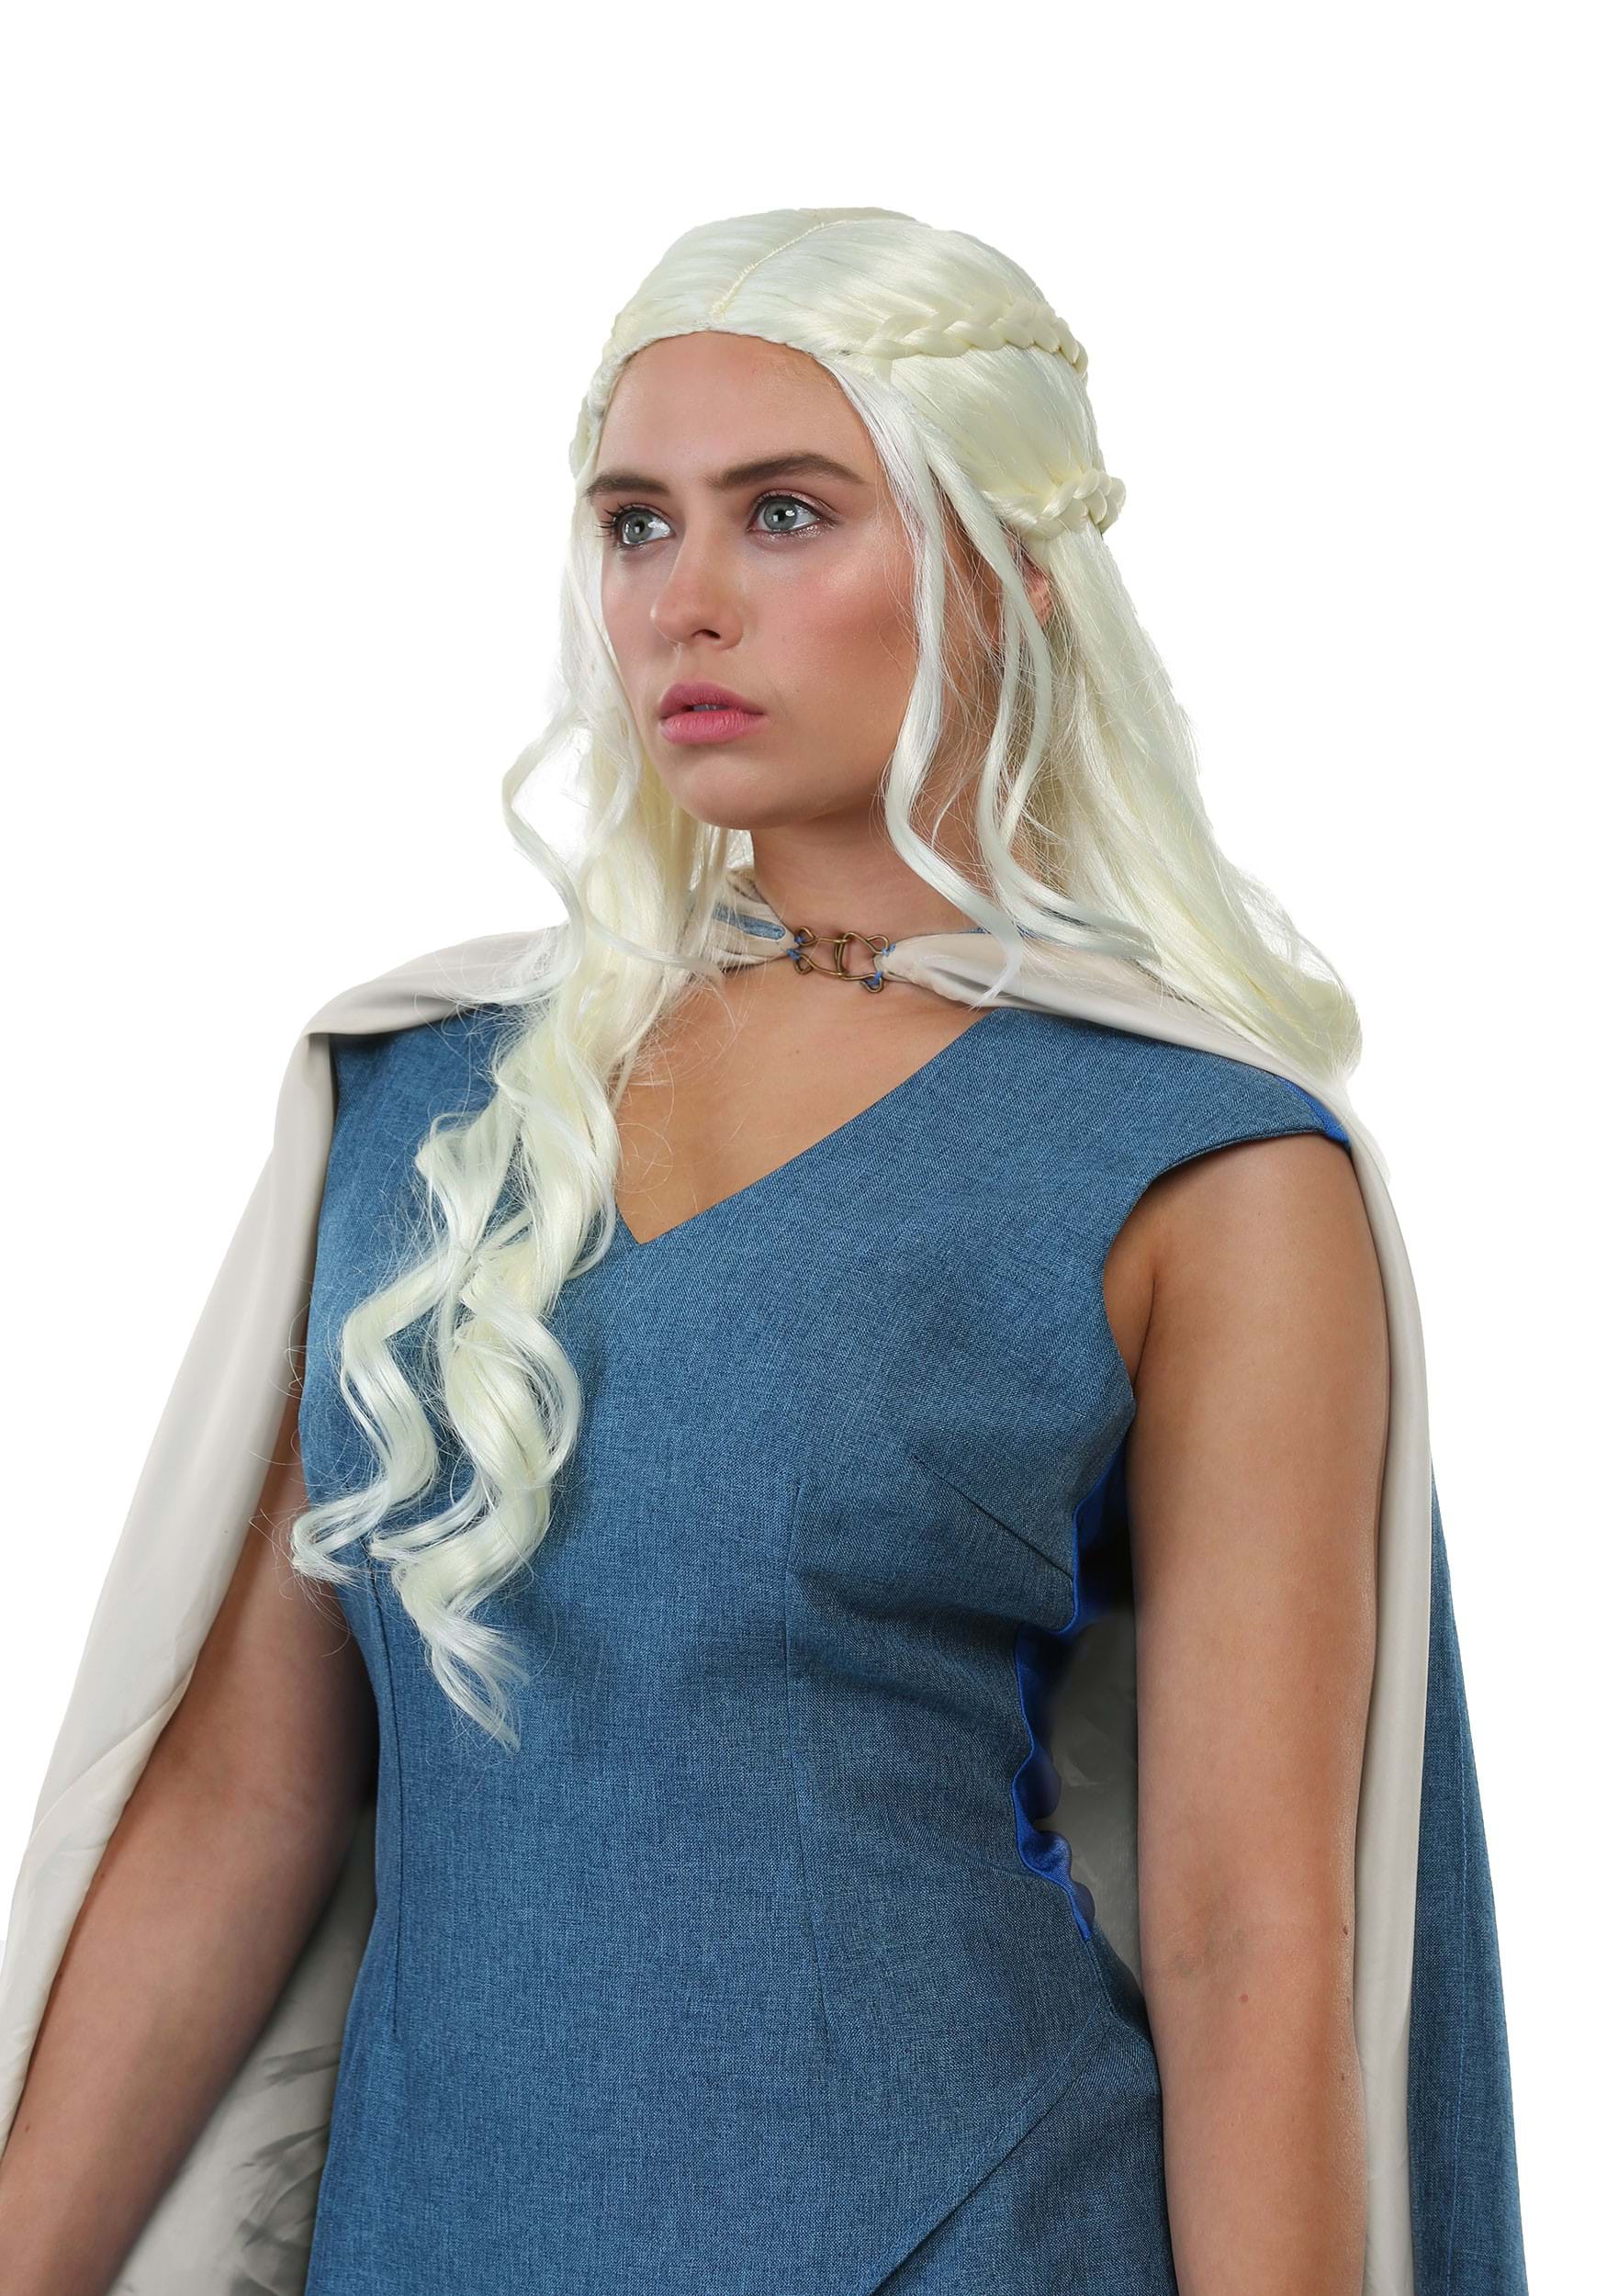 Dragon Queen Fancy Dress Costume For Adults , TV Show Fancy Dress Costumes , Exclusive